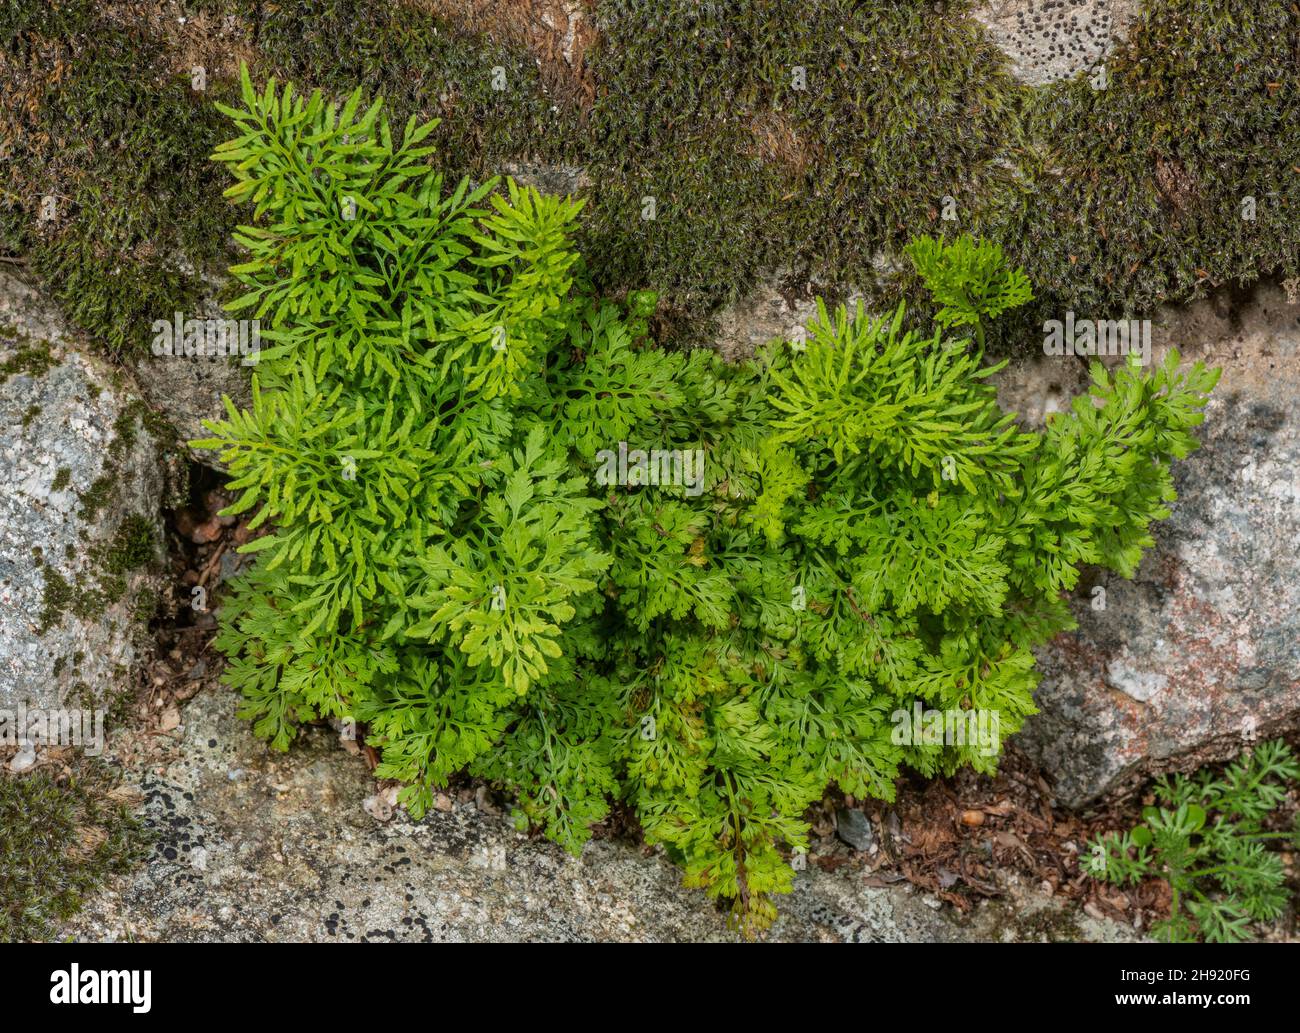 Parsley fern, Cryptogramma crispa, with fertile and sterile fronds in crevice in acid rock. Stock Photo